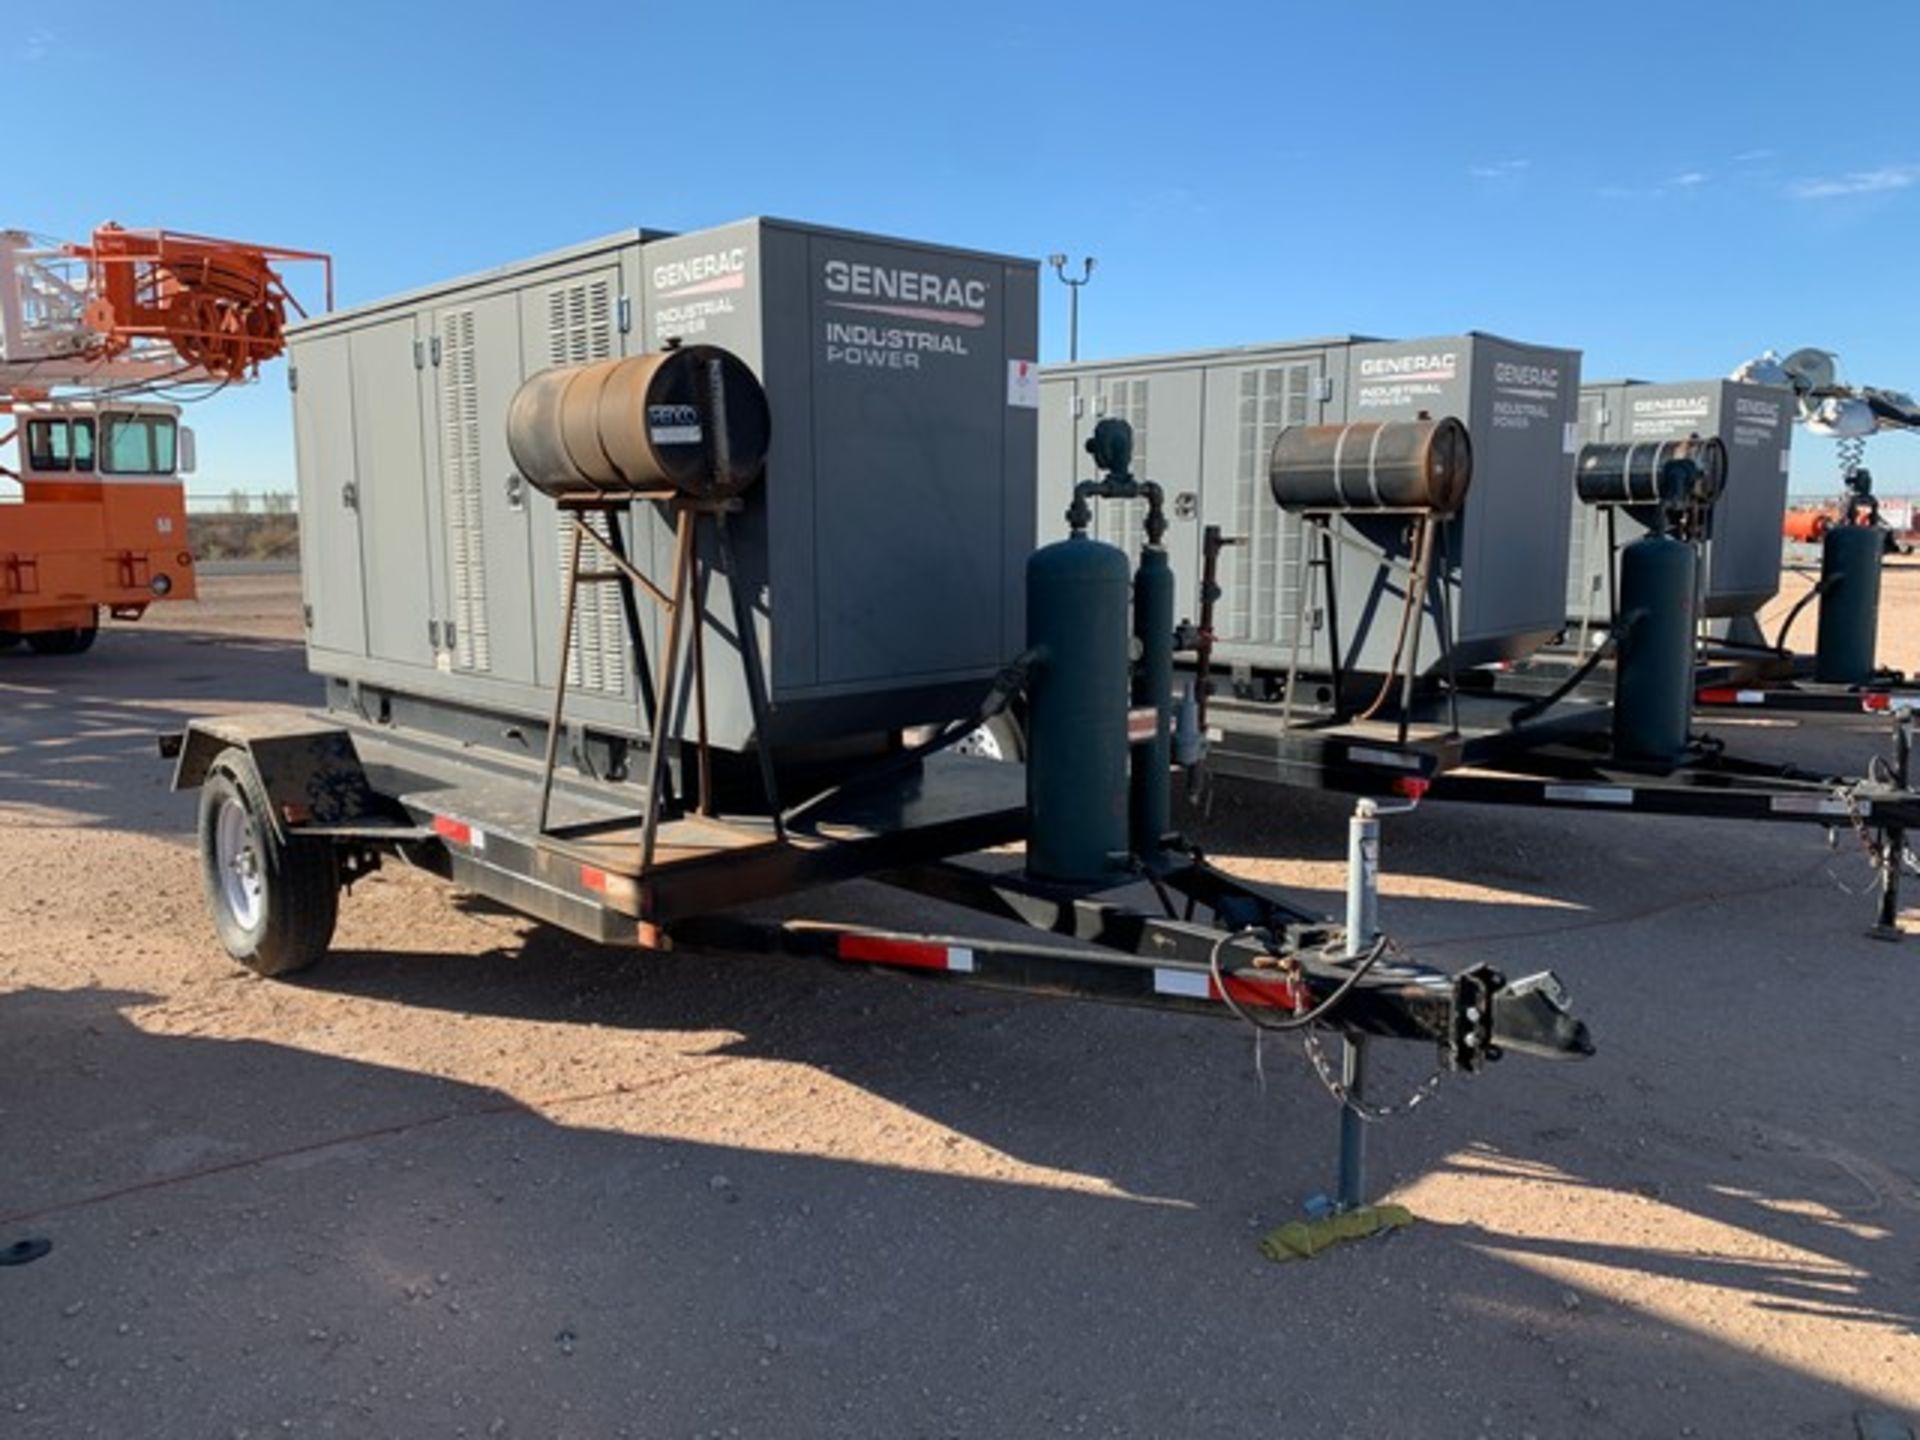 Located in YARD 1 - Midland, TX (2938) 2013 GENERAC INDUSTRIAL POWER 130 KW, 277/480V 3 PHASE - Image 2 of 4